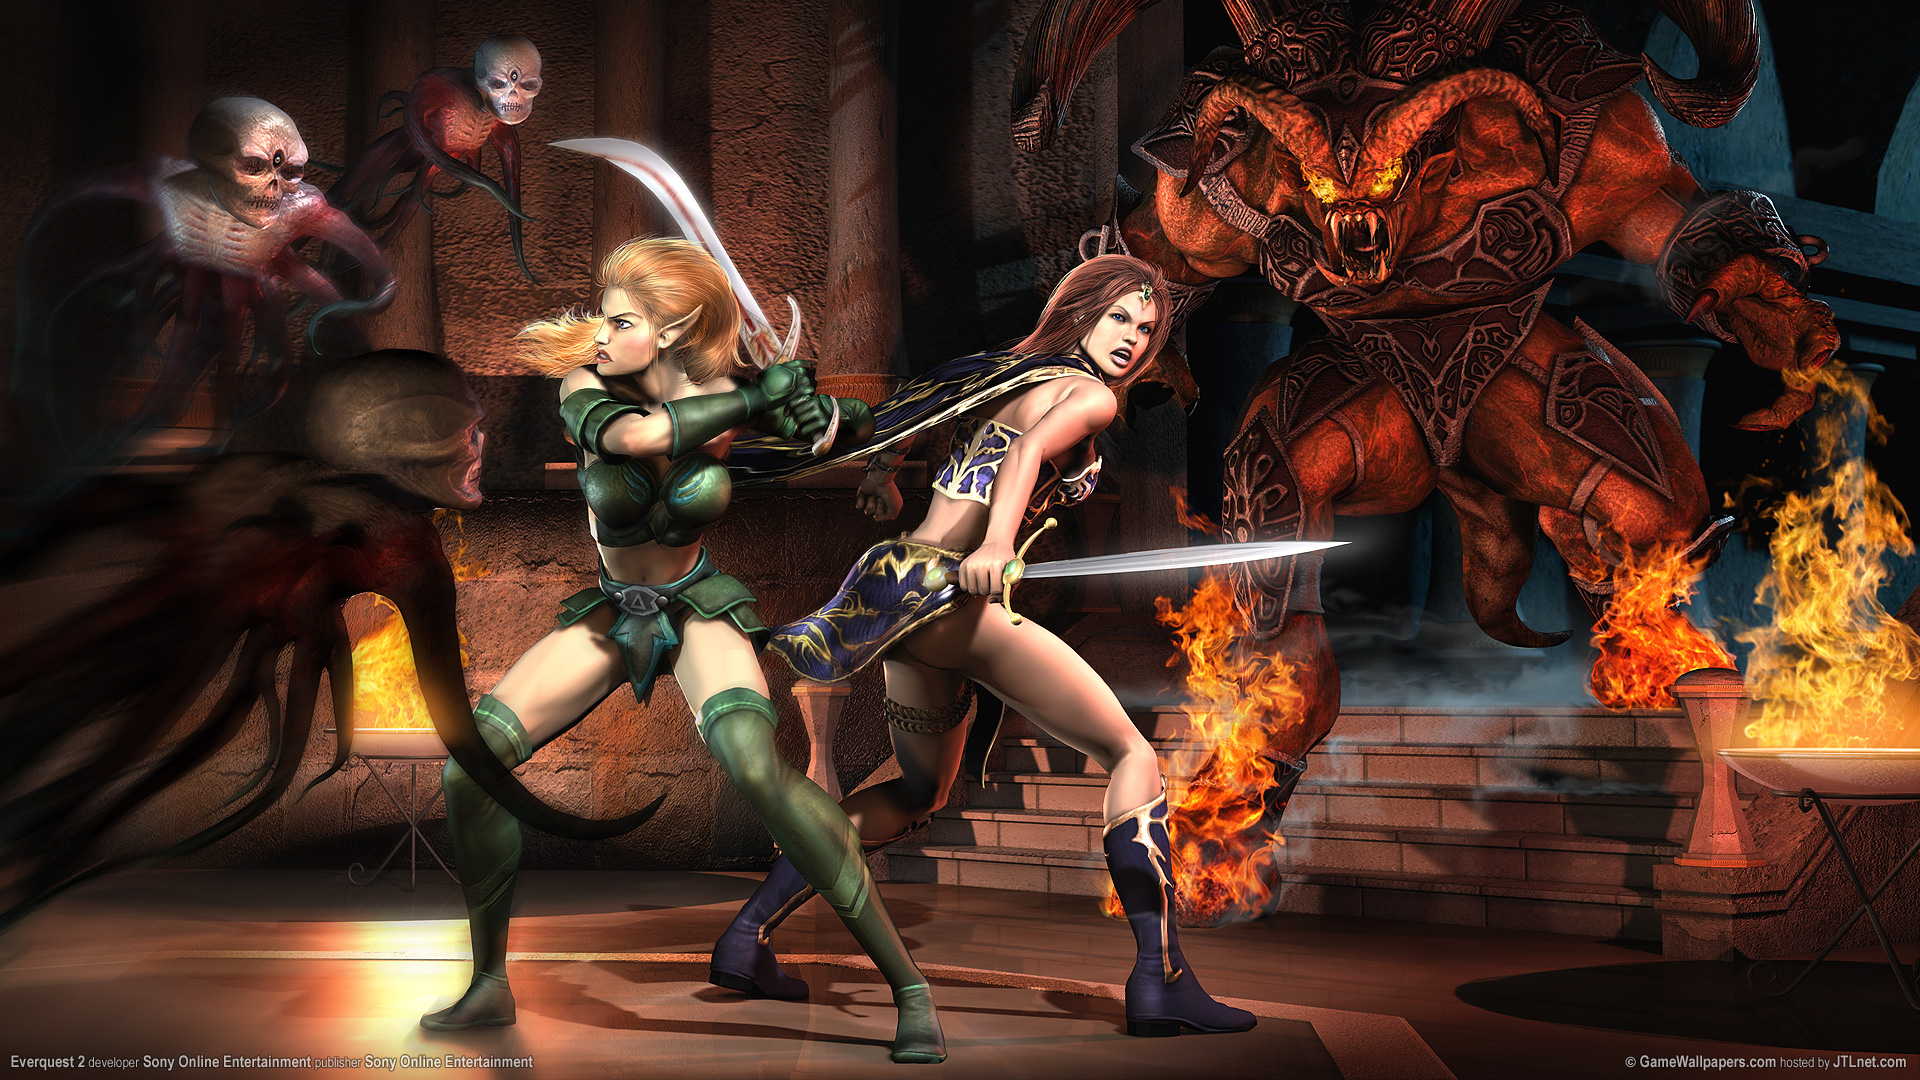 Video Game EverQuest HD Wallpaper | Background Image